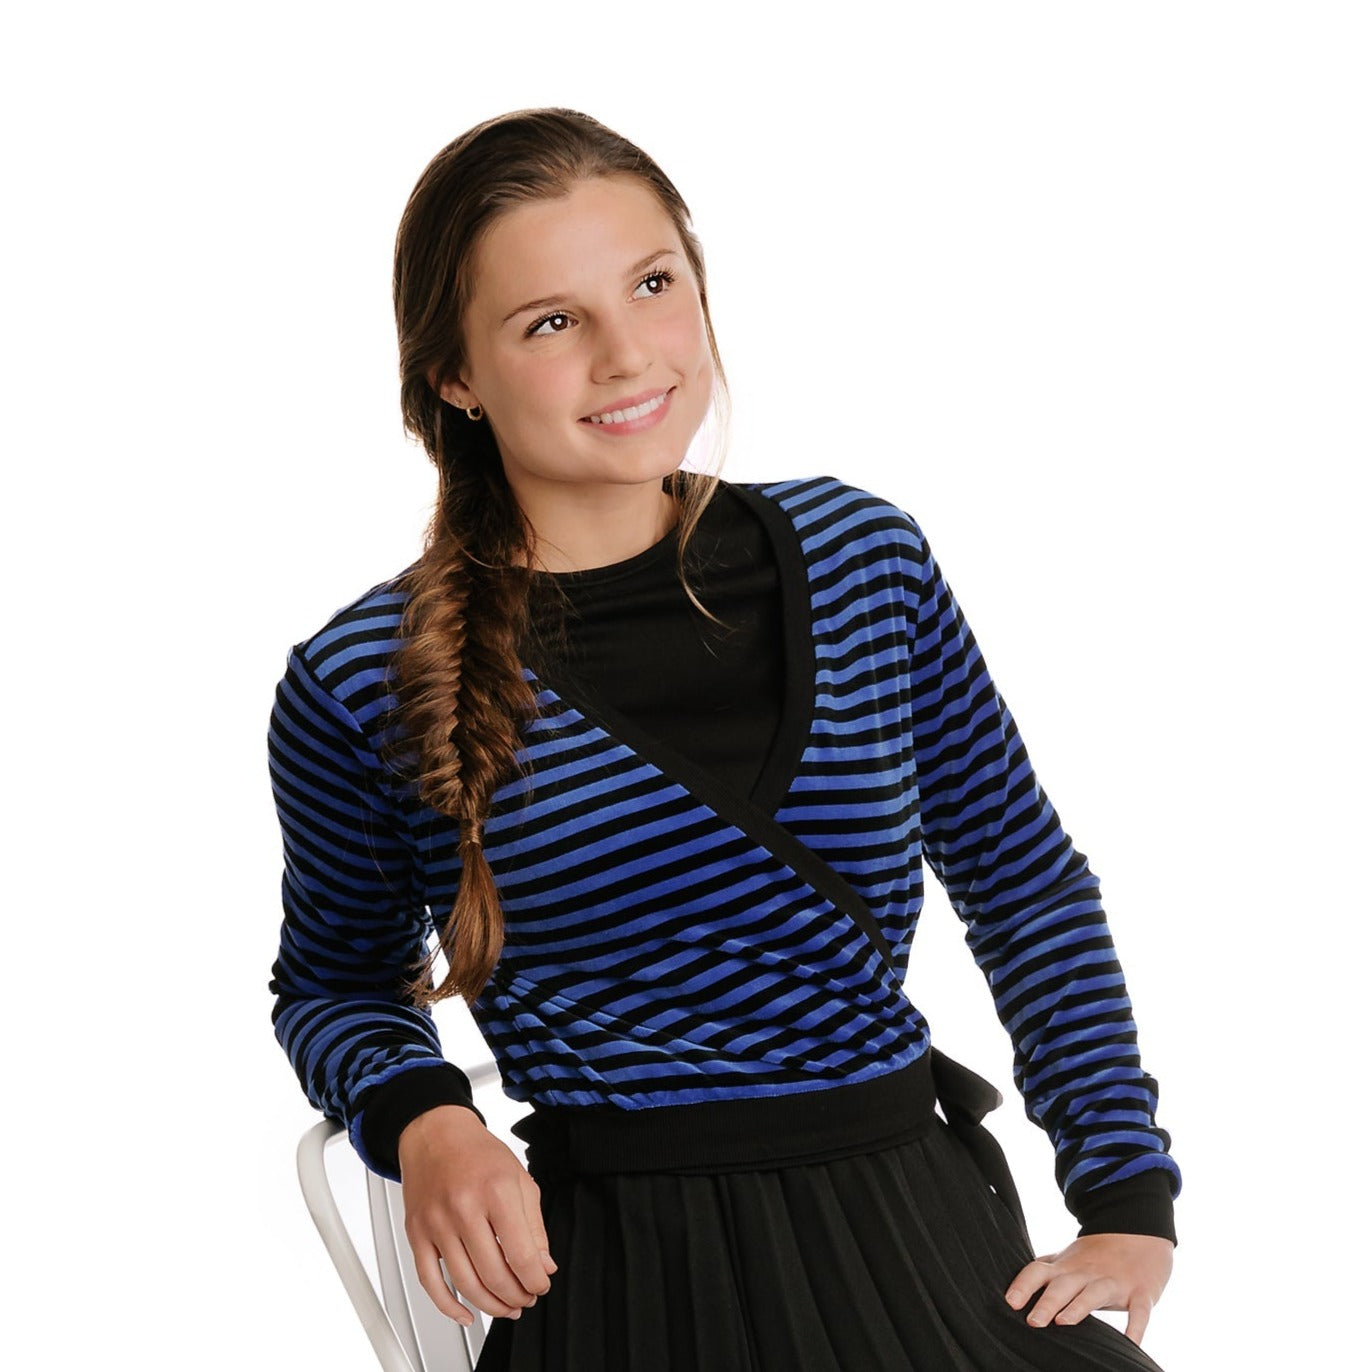 Royal Blue and Black Striped Velour Wrap Top